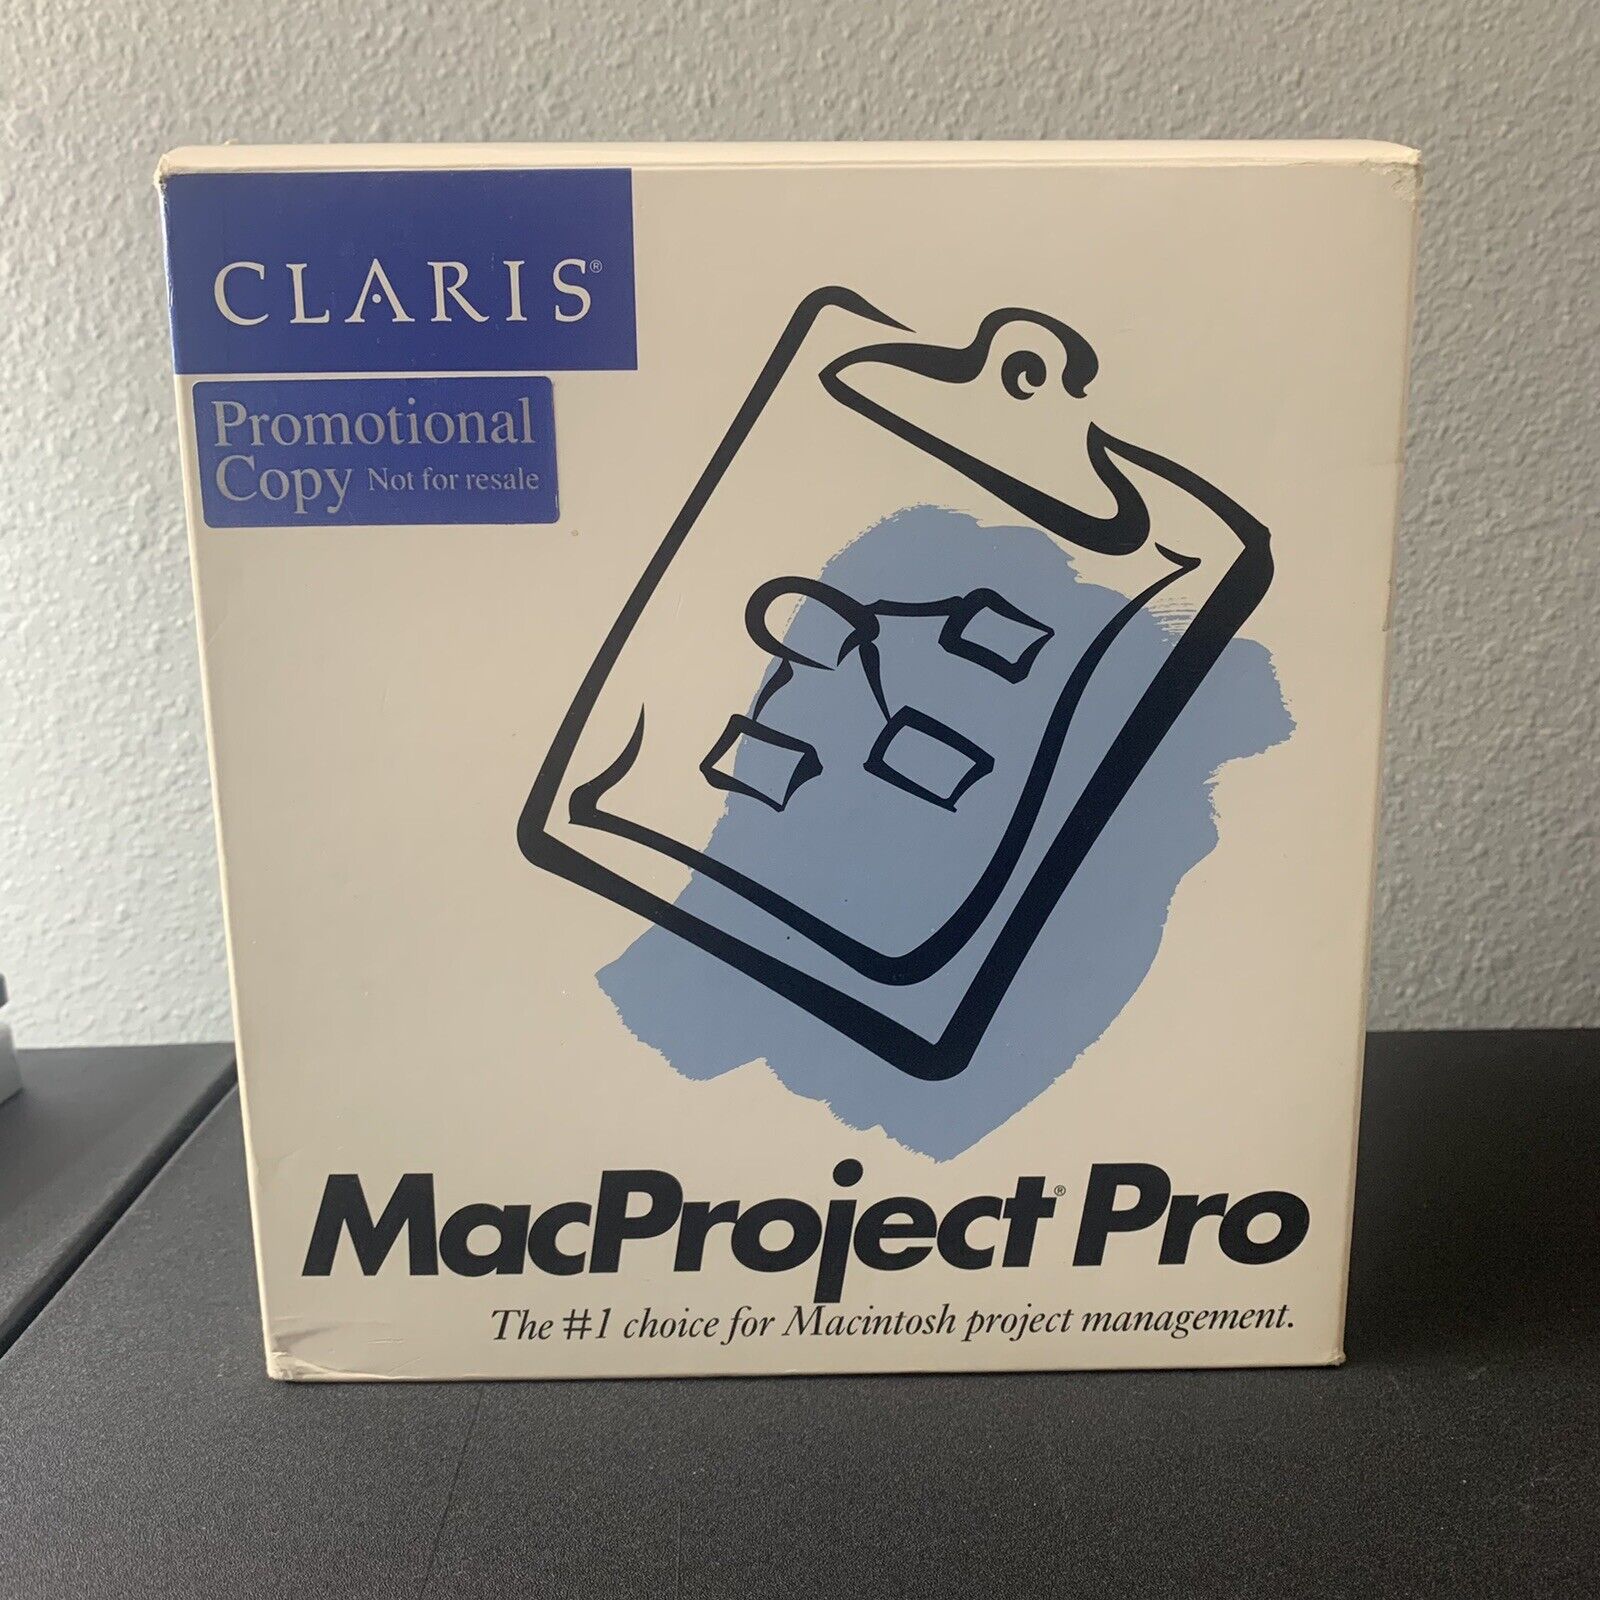 Claris MacProject Pro Promotional Copy Macintosh Project Management NOS Open Box